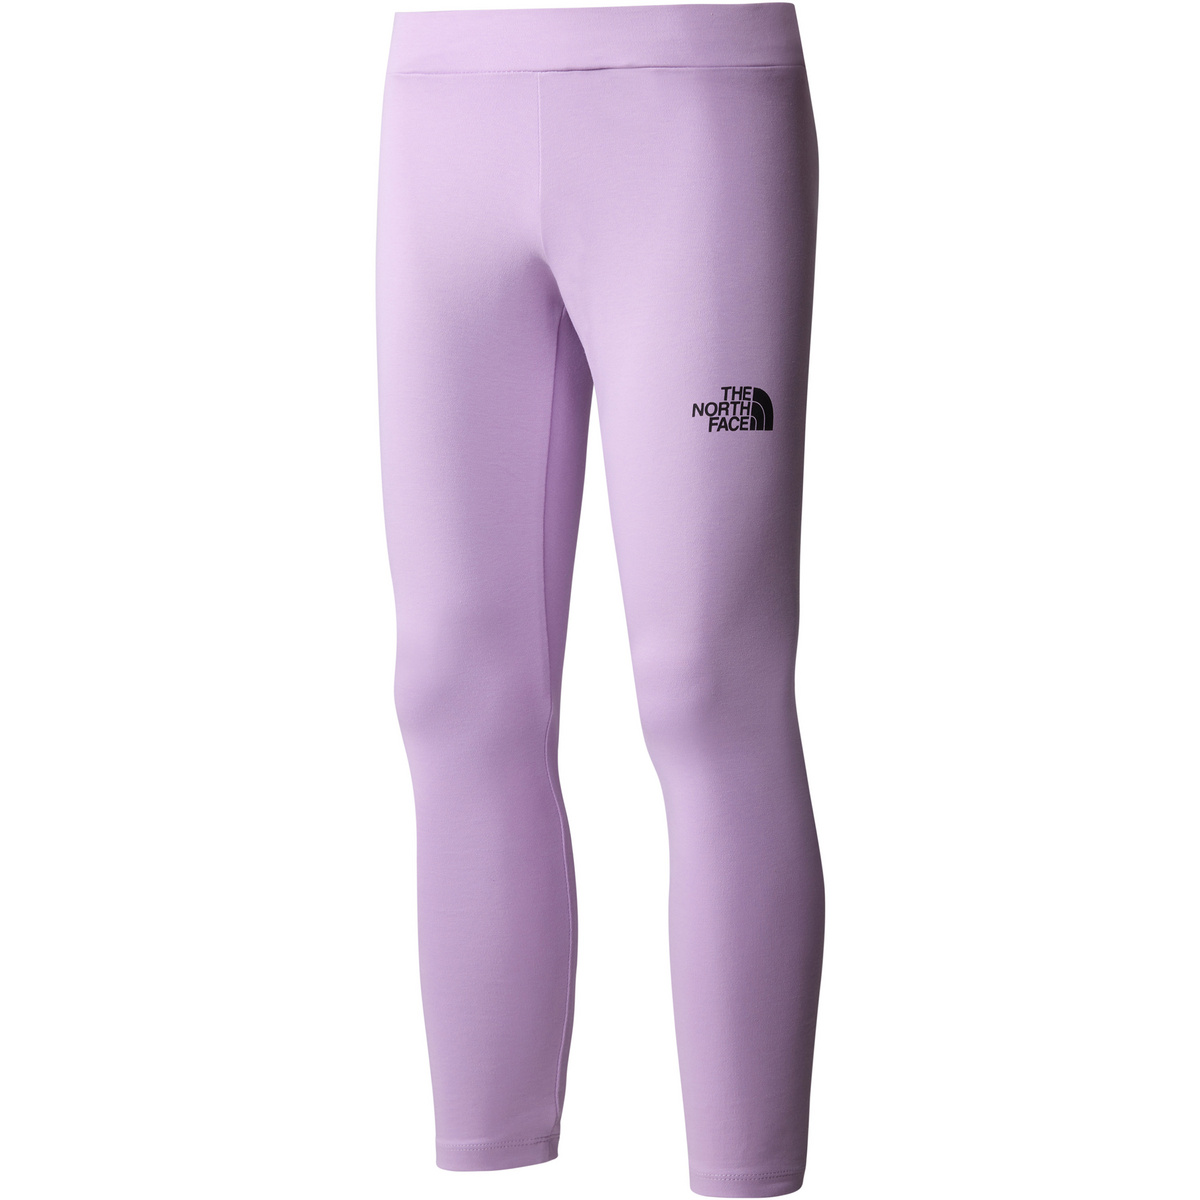 The North Face Kinder G Graphic Tights von The North Face